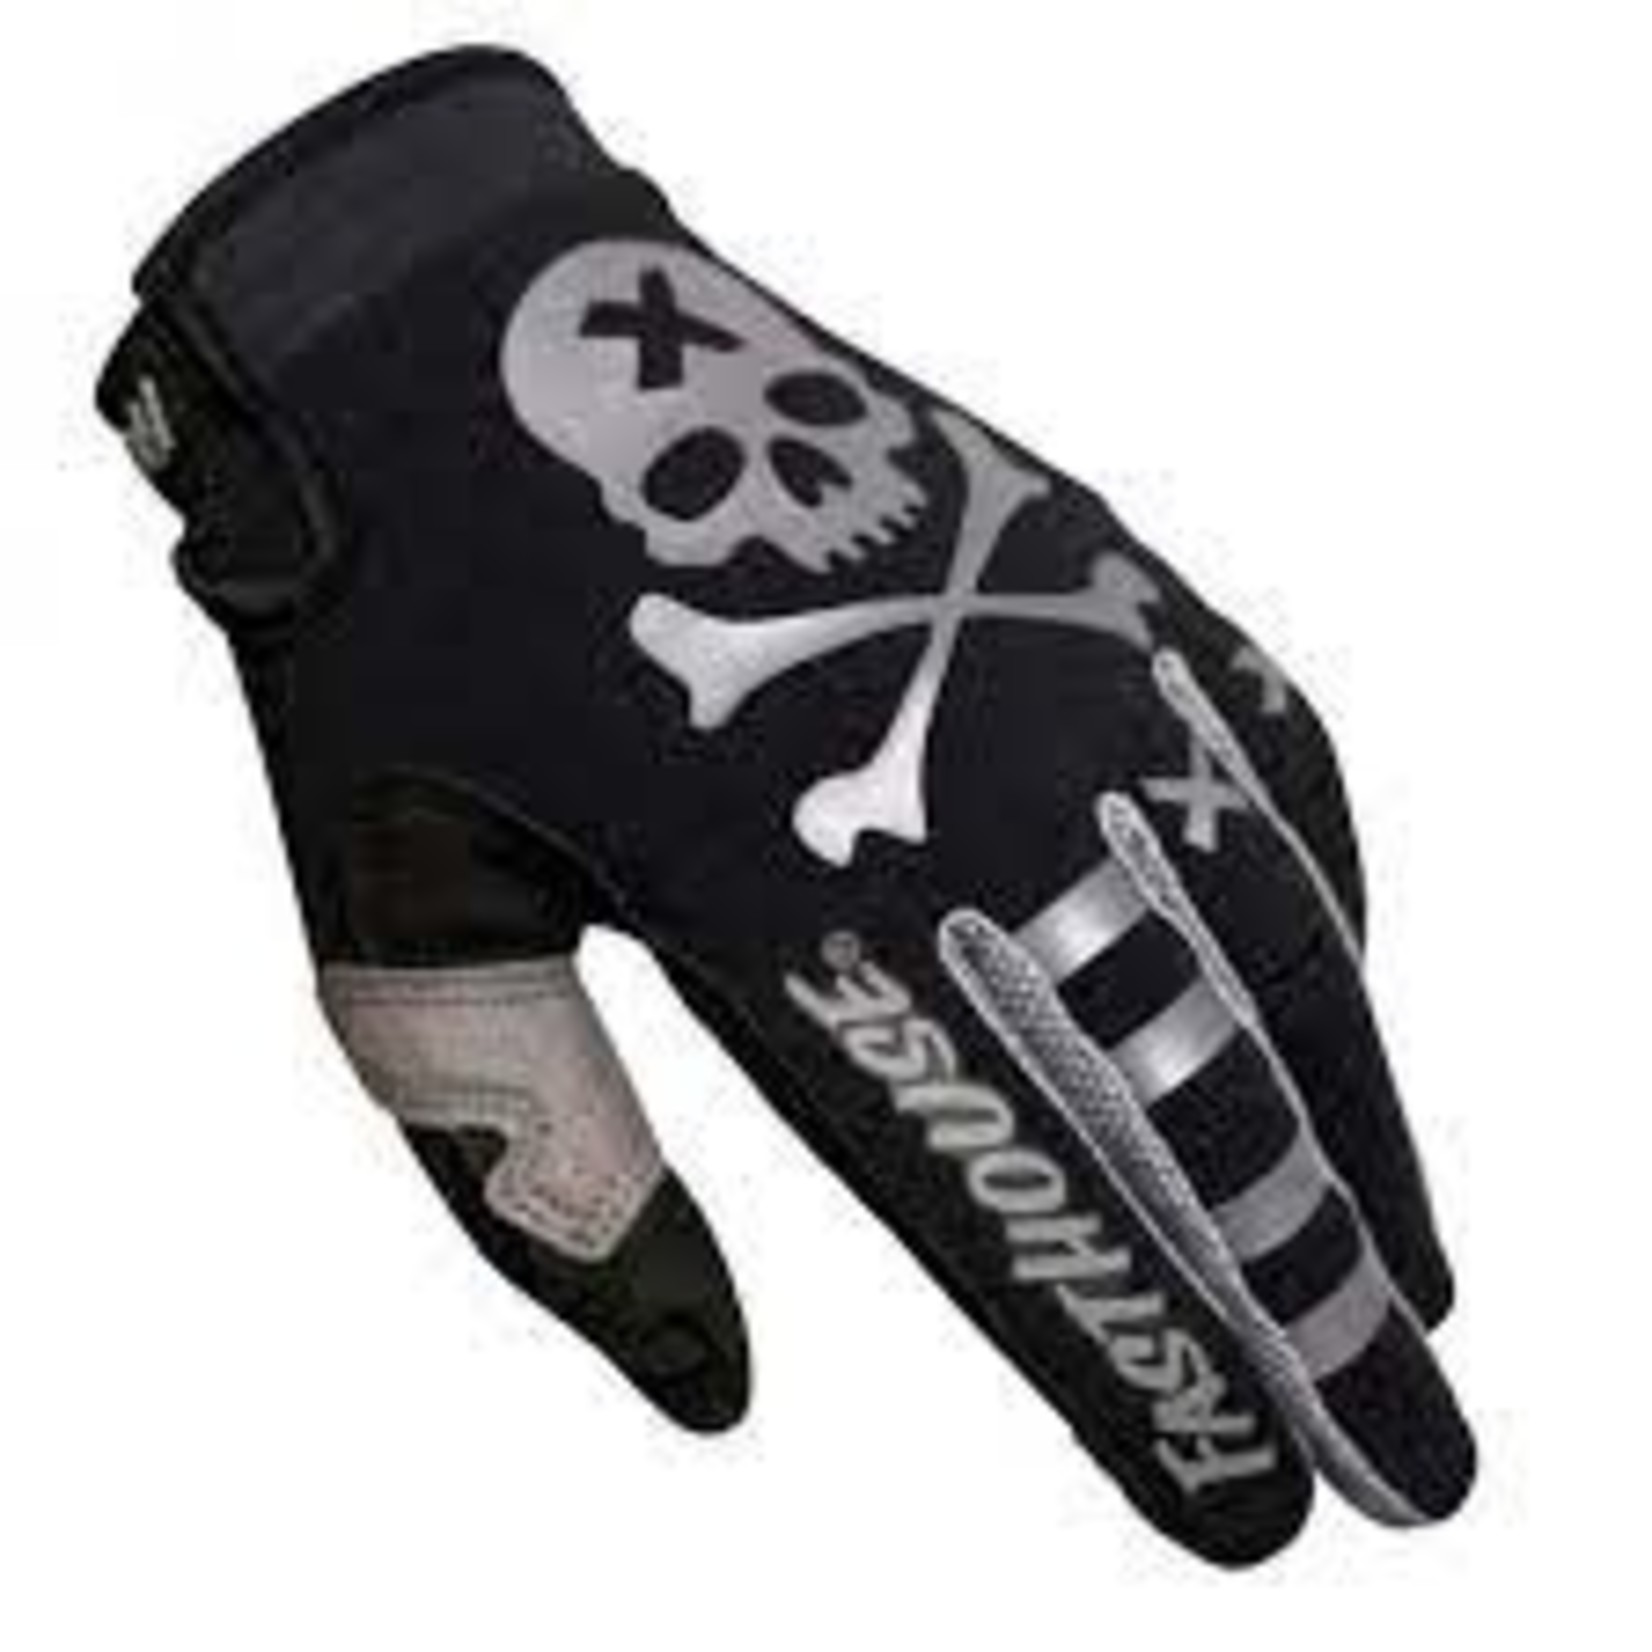 FASTHOUSE FASTHOUSE YOUTH SPEED STYLE RUFIO GLOVE